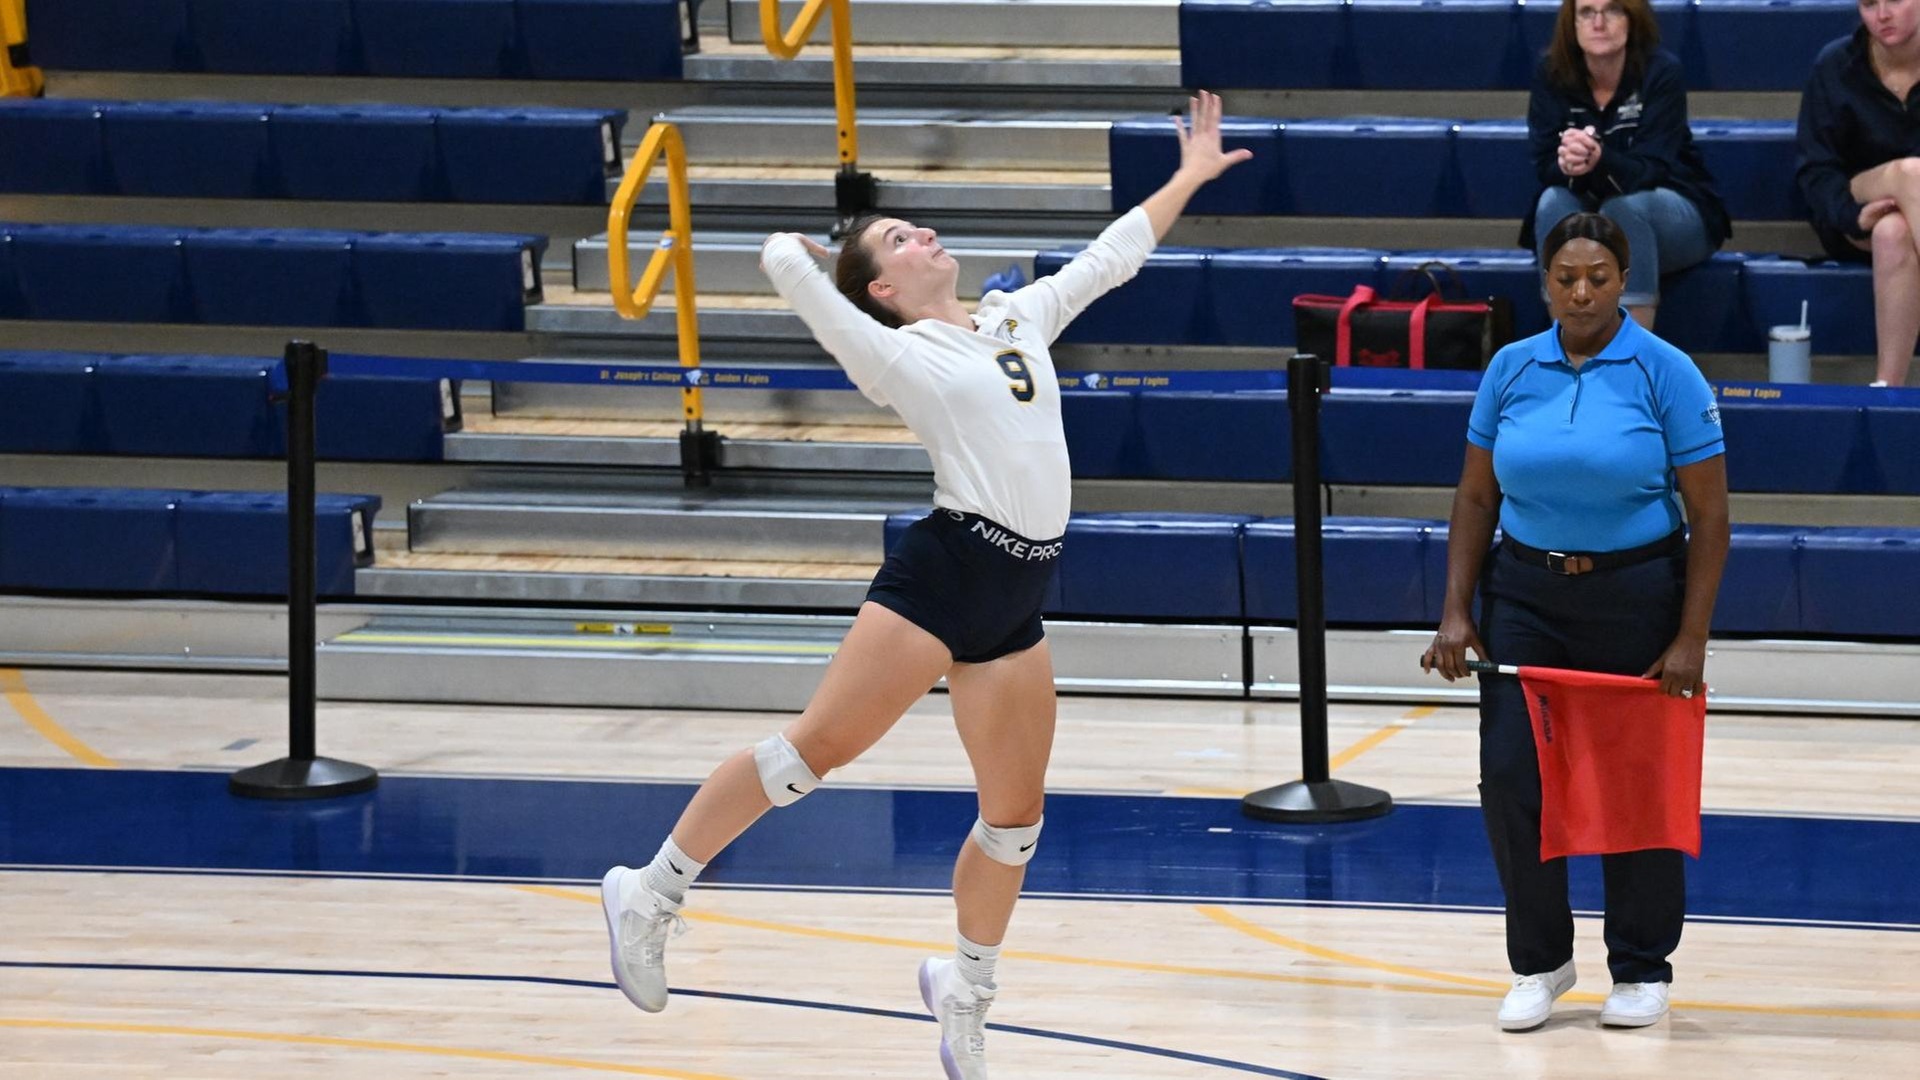 Women's Volleyball Comes Away with a 3-1 Win at Sarah Lawrence